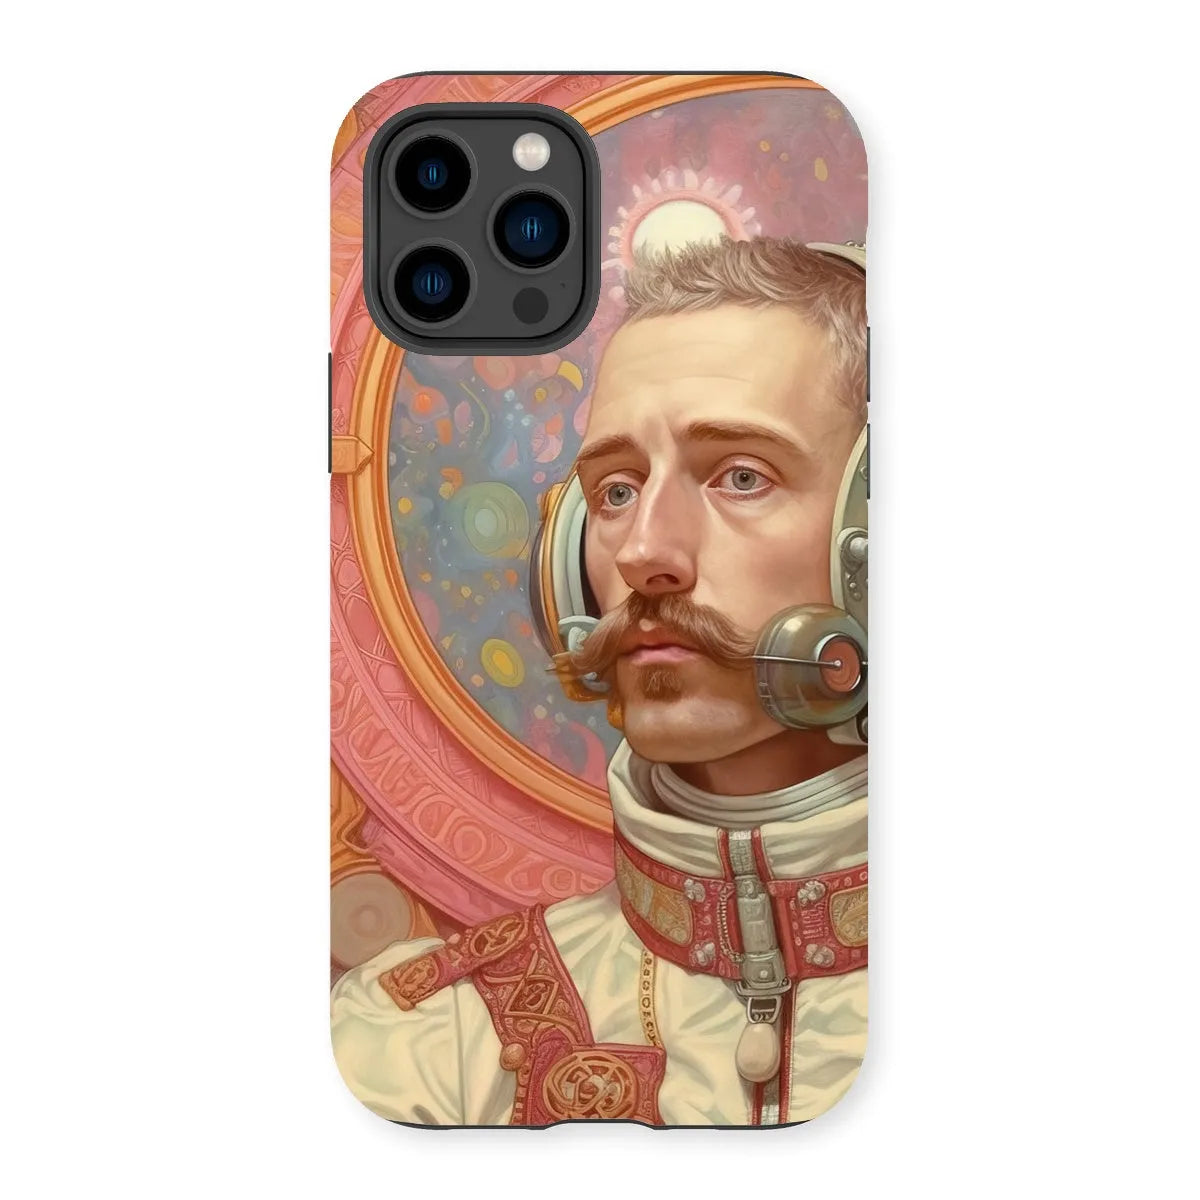 Axel The Gay Astronaut - Gay Aesthetic Art Phone Case - Iphone 14 Pro / Matte - Mobile Phone Cases - Aesthetic Art